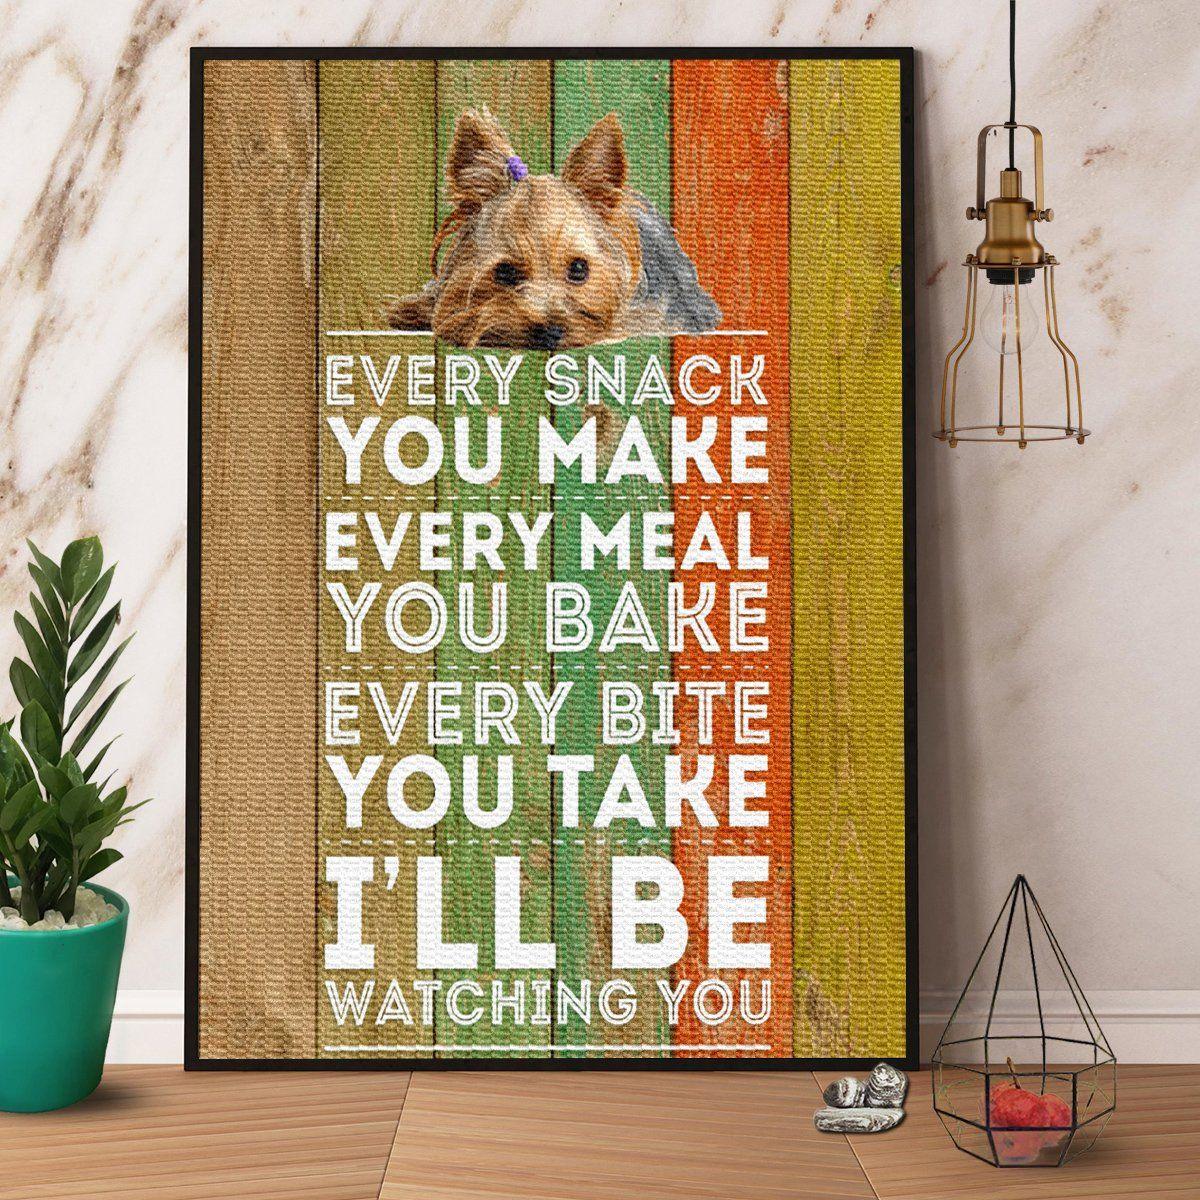 Yorkshire I’ll Be Watching - Matte Canvas, Wall Decor Visual Art - Perfect Gift For Yorkshire Terrier Owner, Breeder Or Yorkshire Terrier Groomer Who Loves This Breed - Amzanimalsgift